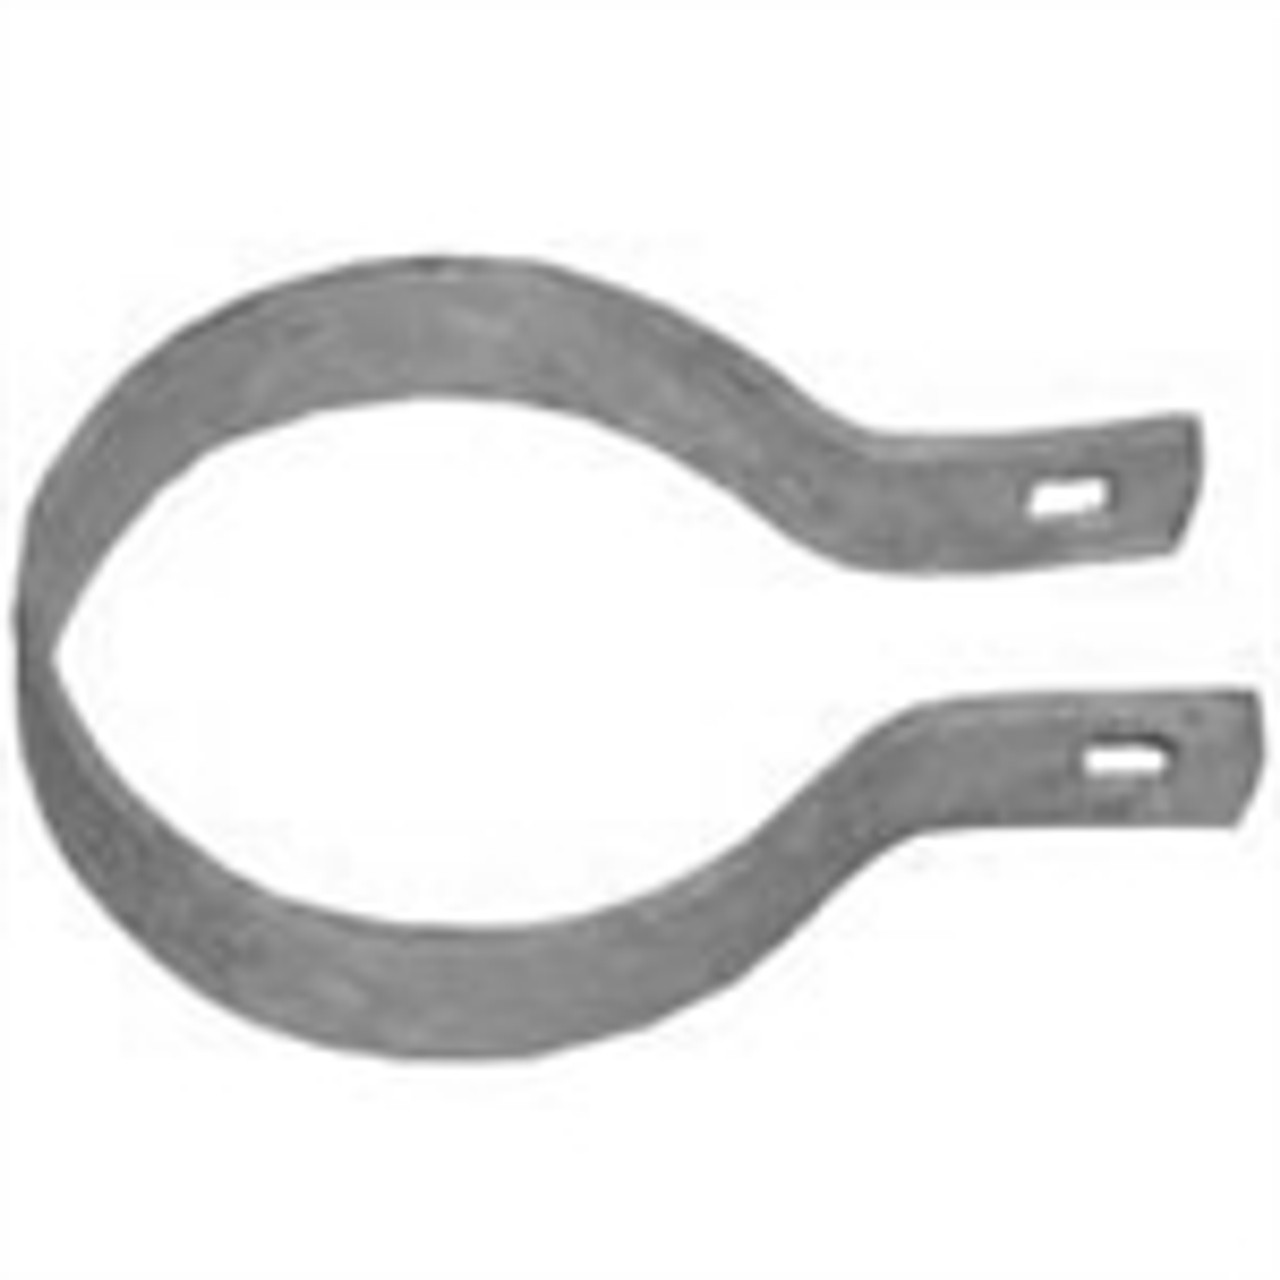 Galvanized Flat Brace Band for Residential Use